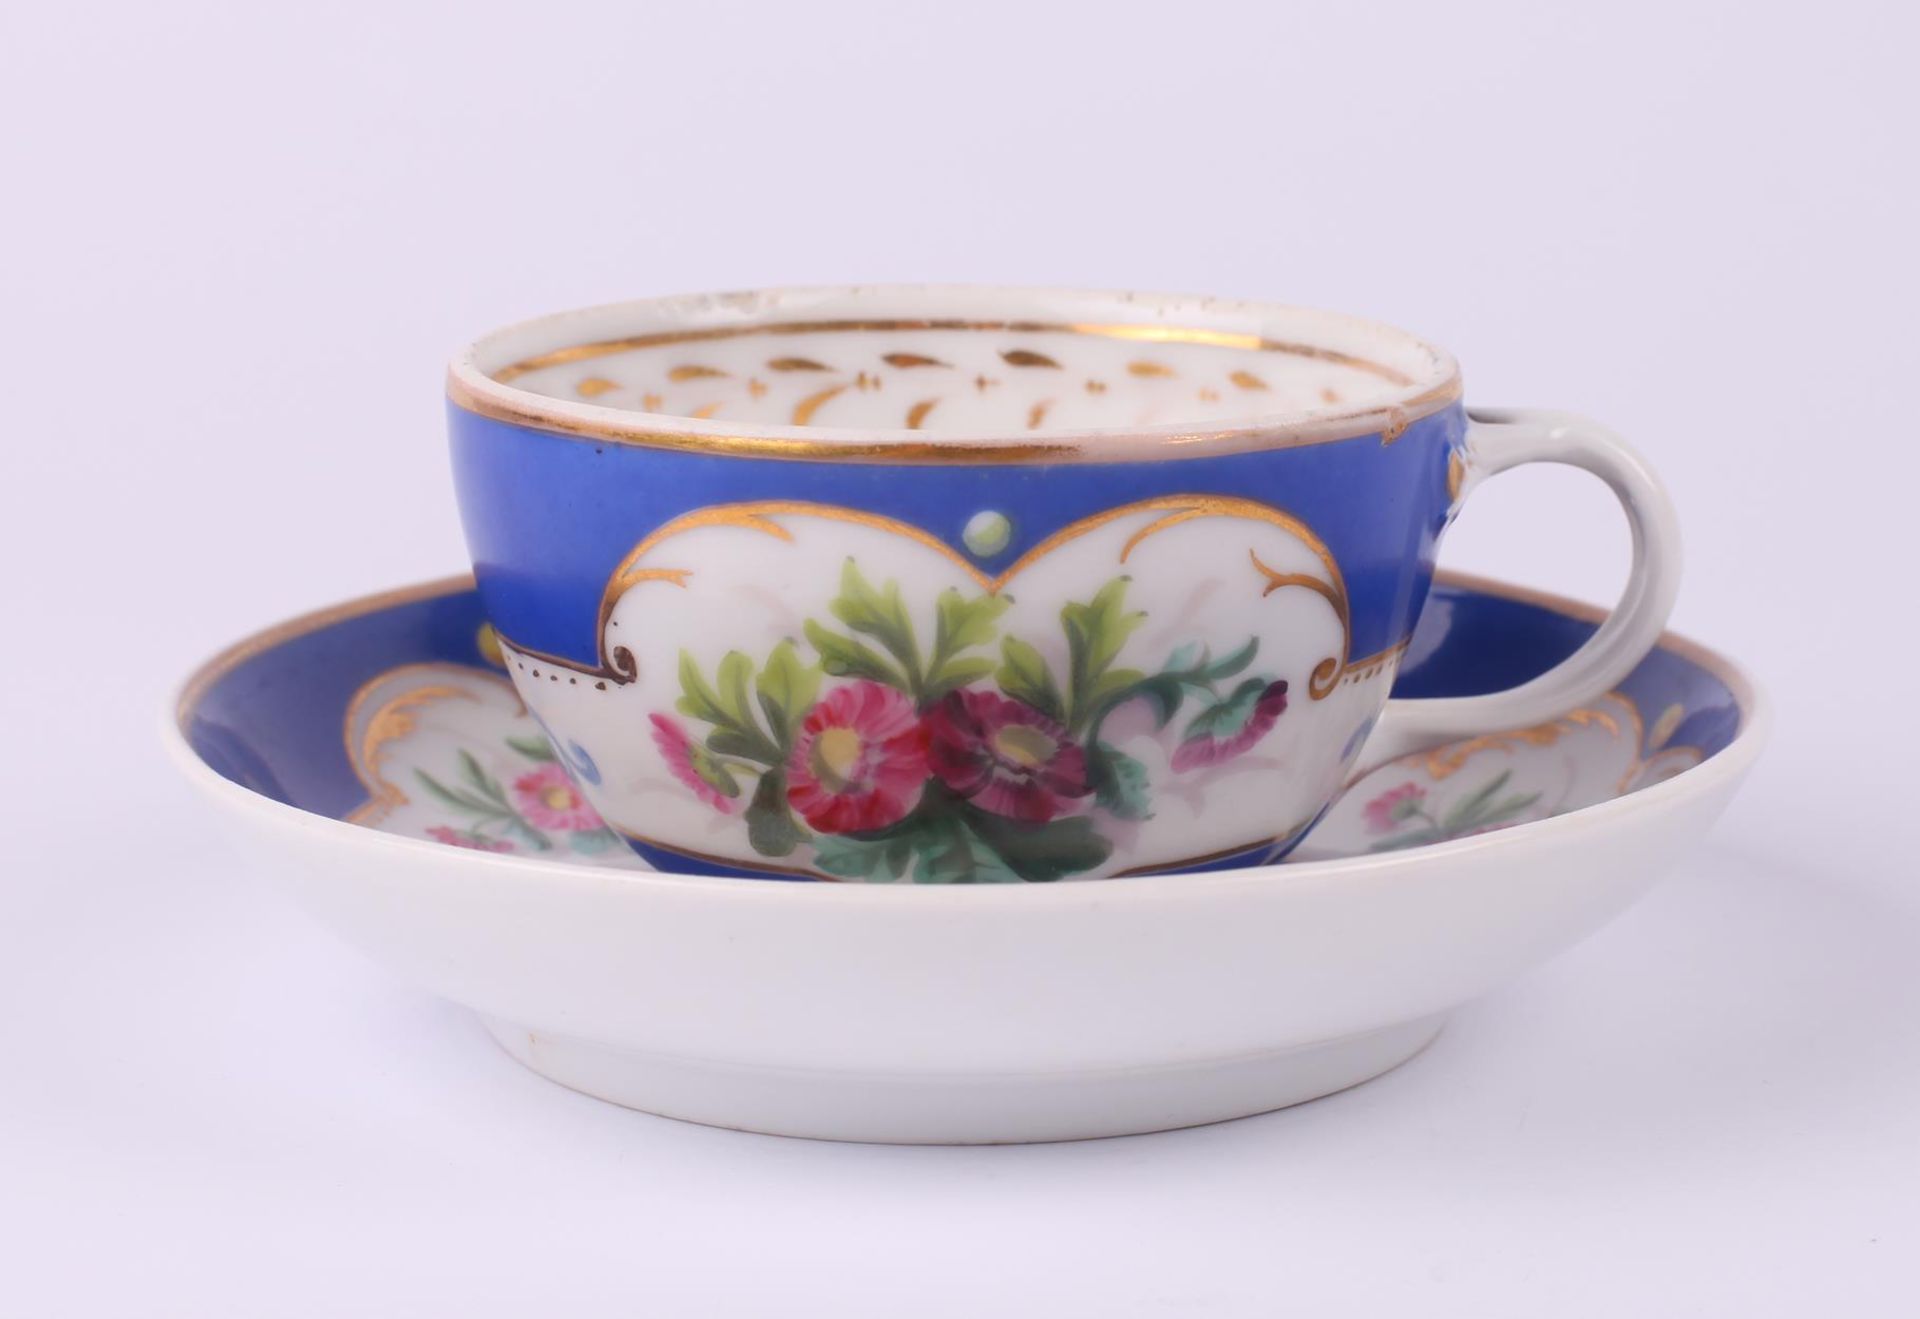 Tea cup and saucer set with floral painting. Russia. 1890s. Porcelain, painting, gilding. Cup: 5x8